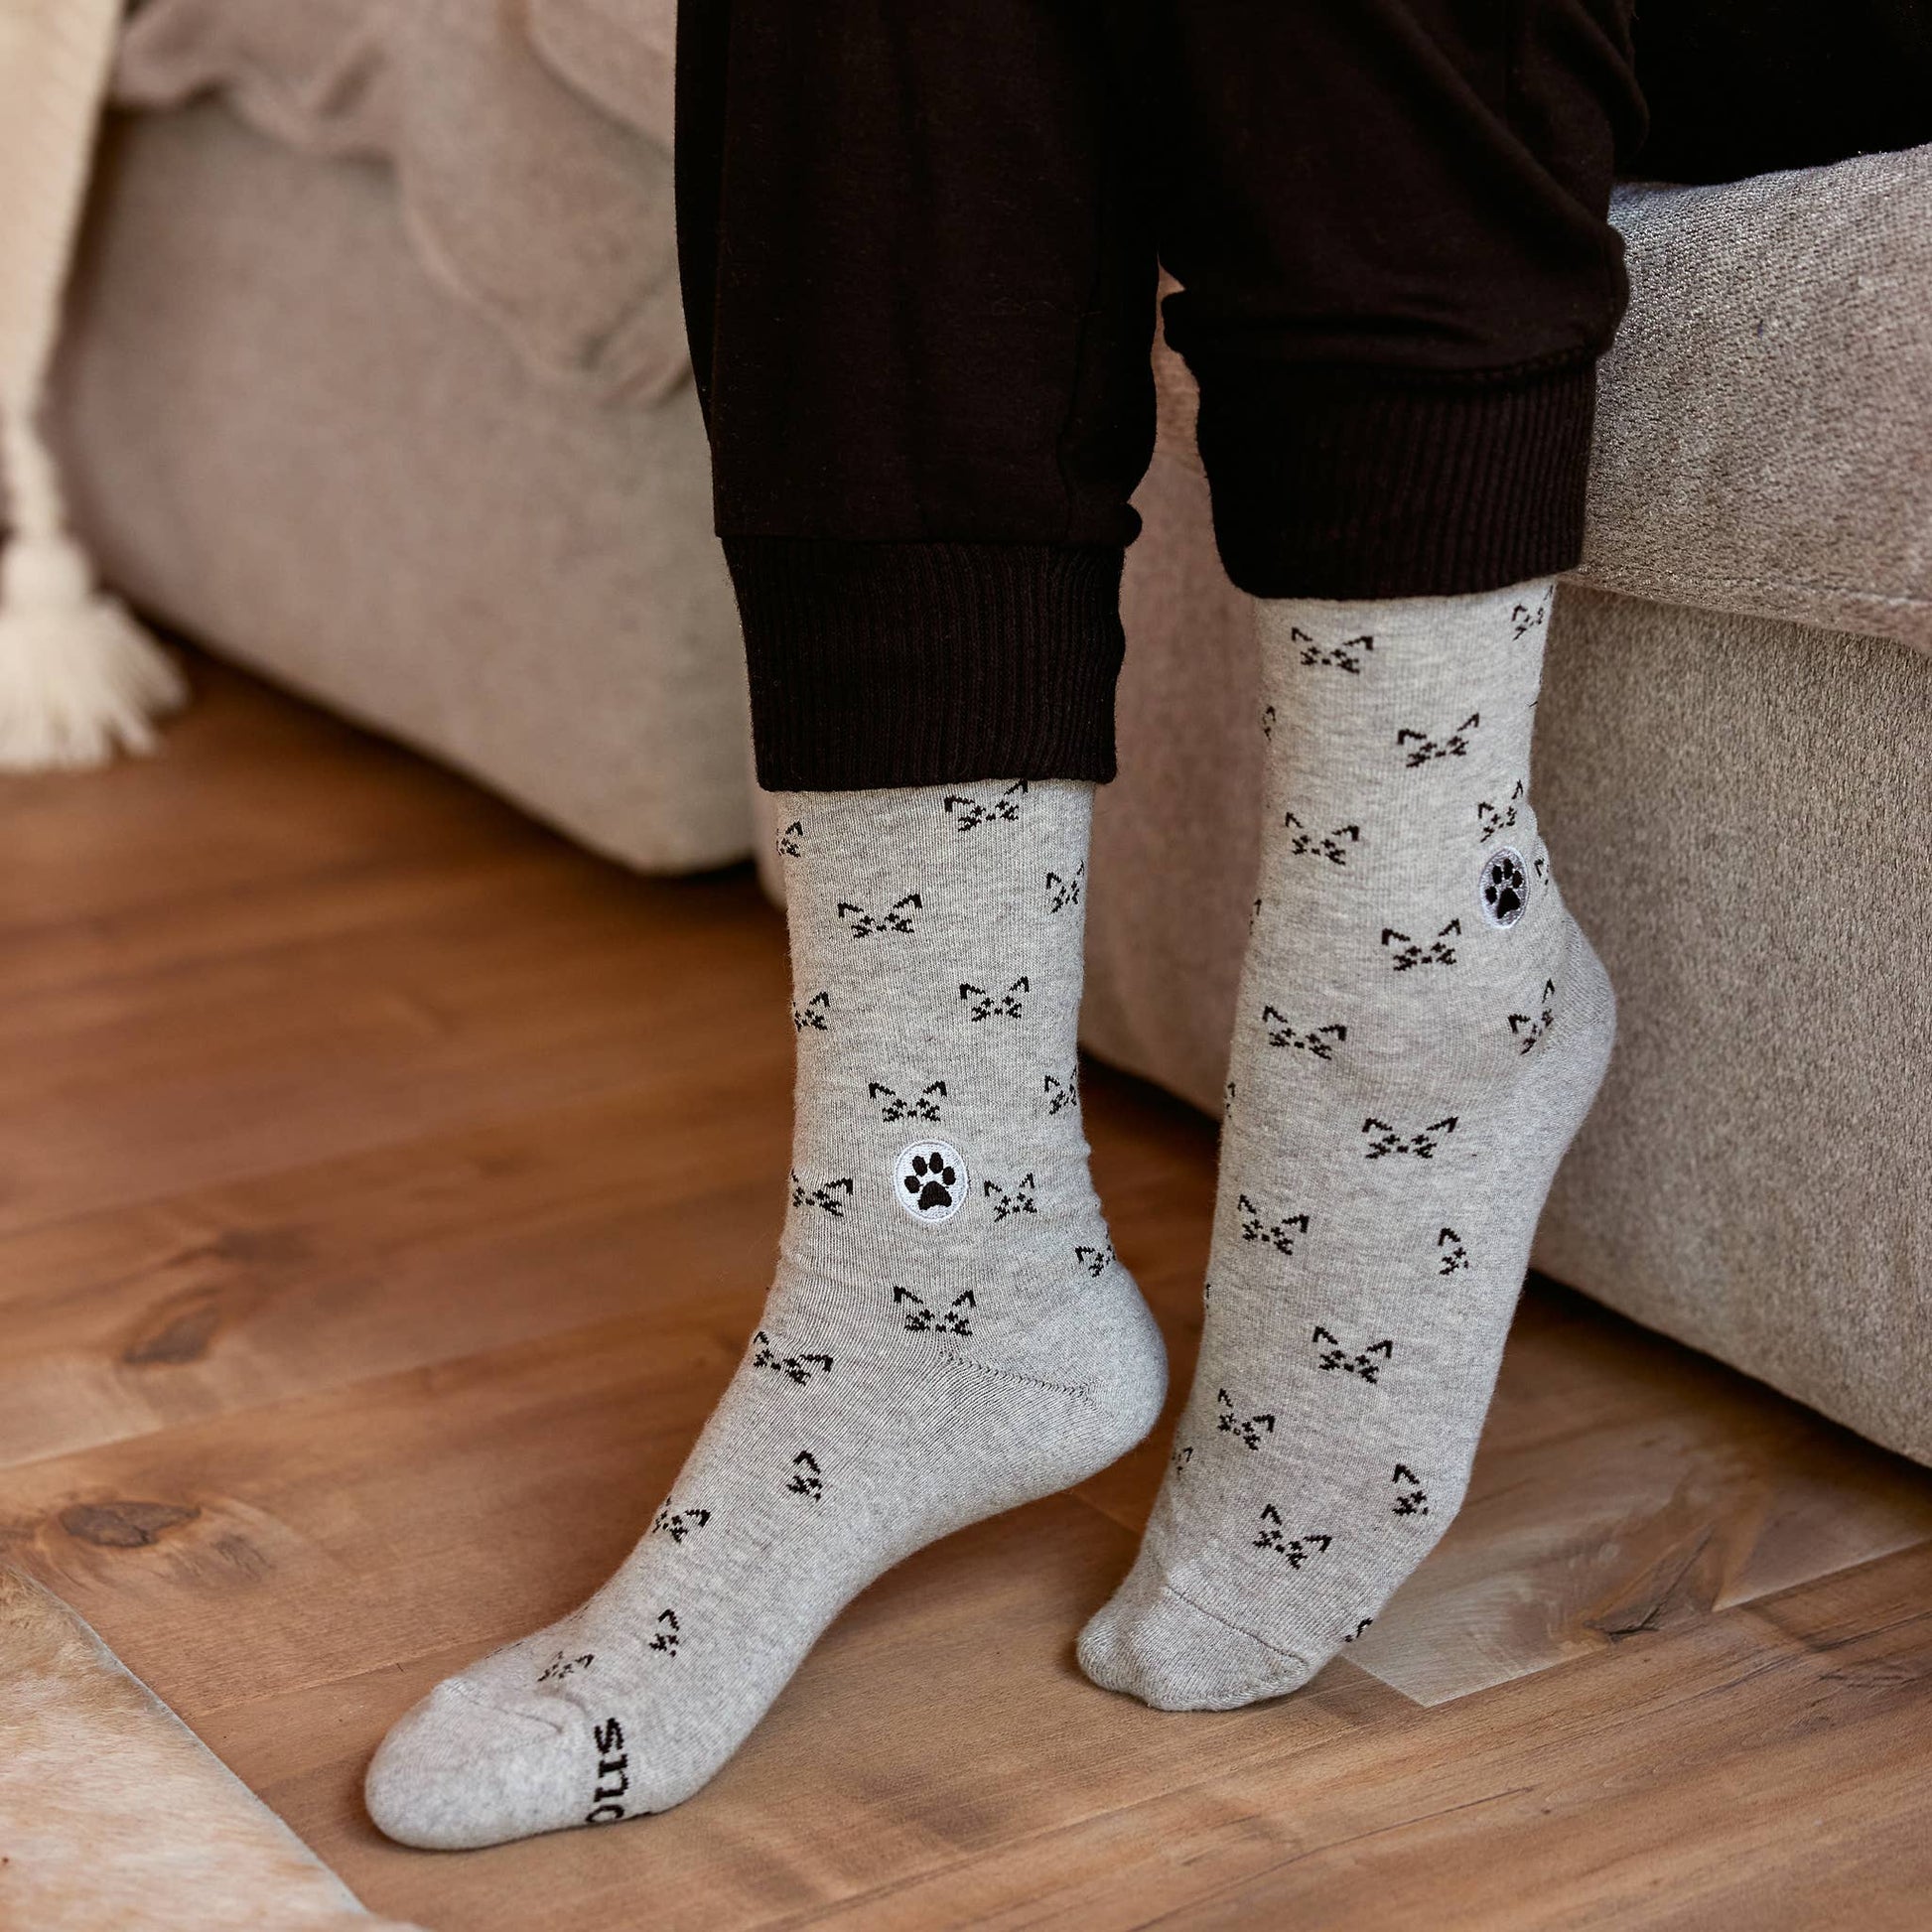 Conscious Step - Socks that Save Cats (Gray Cats)  Conscious Step   -better made easy-eco-friendly-sustainable-gifting